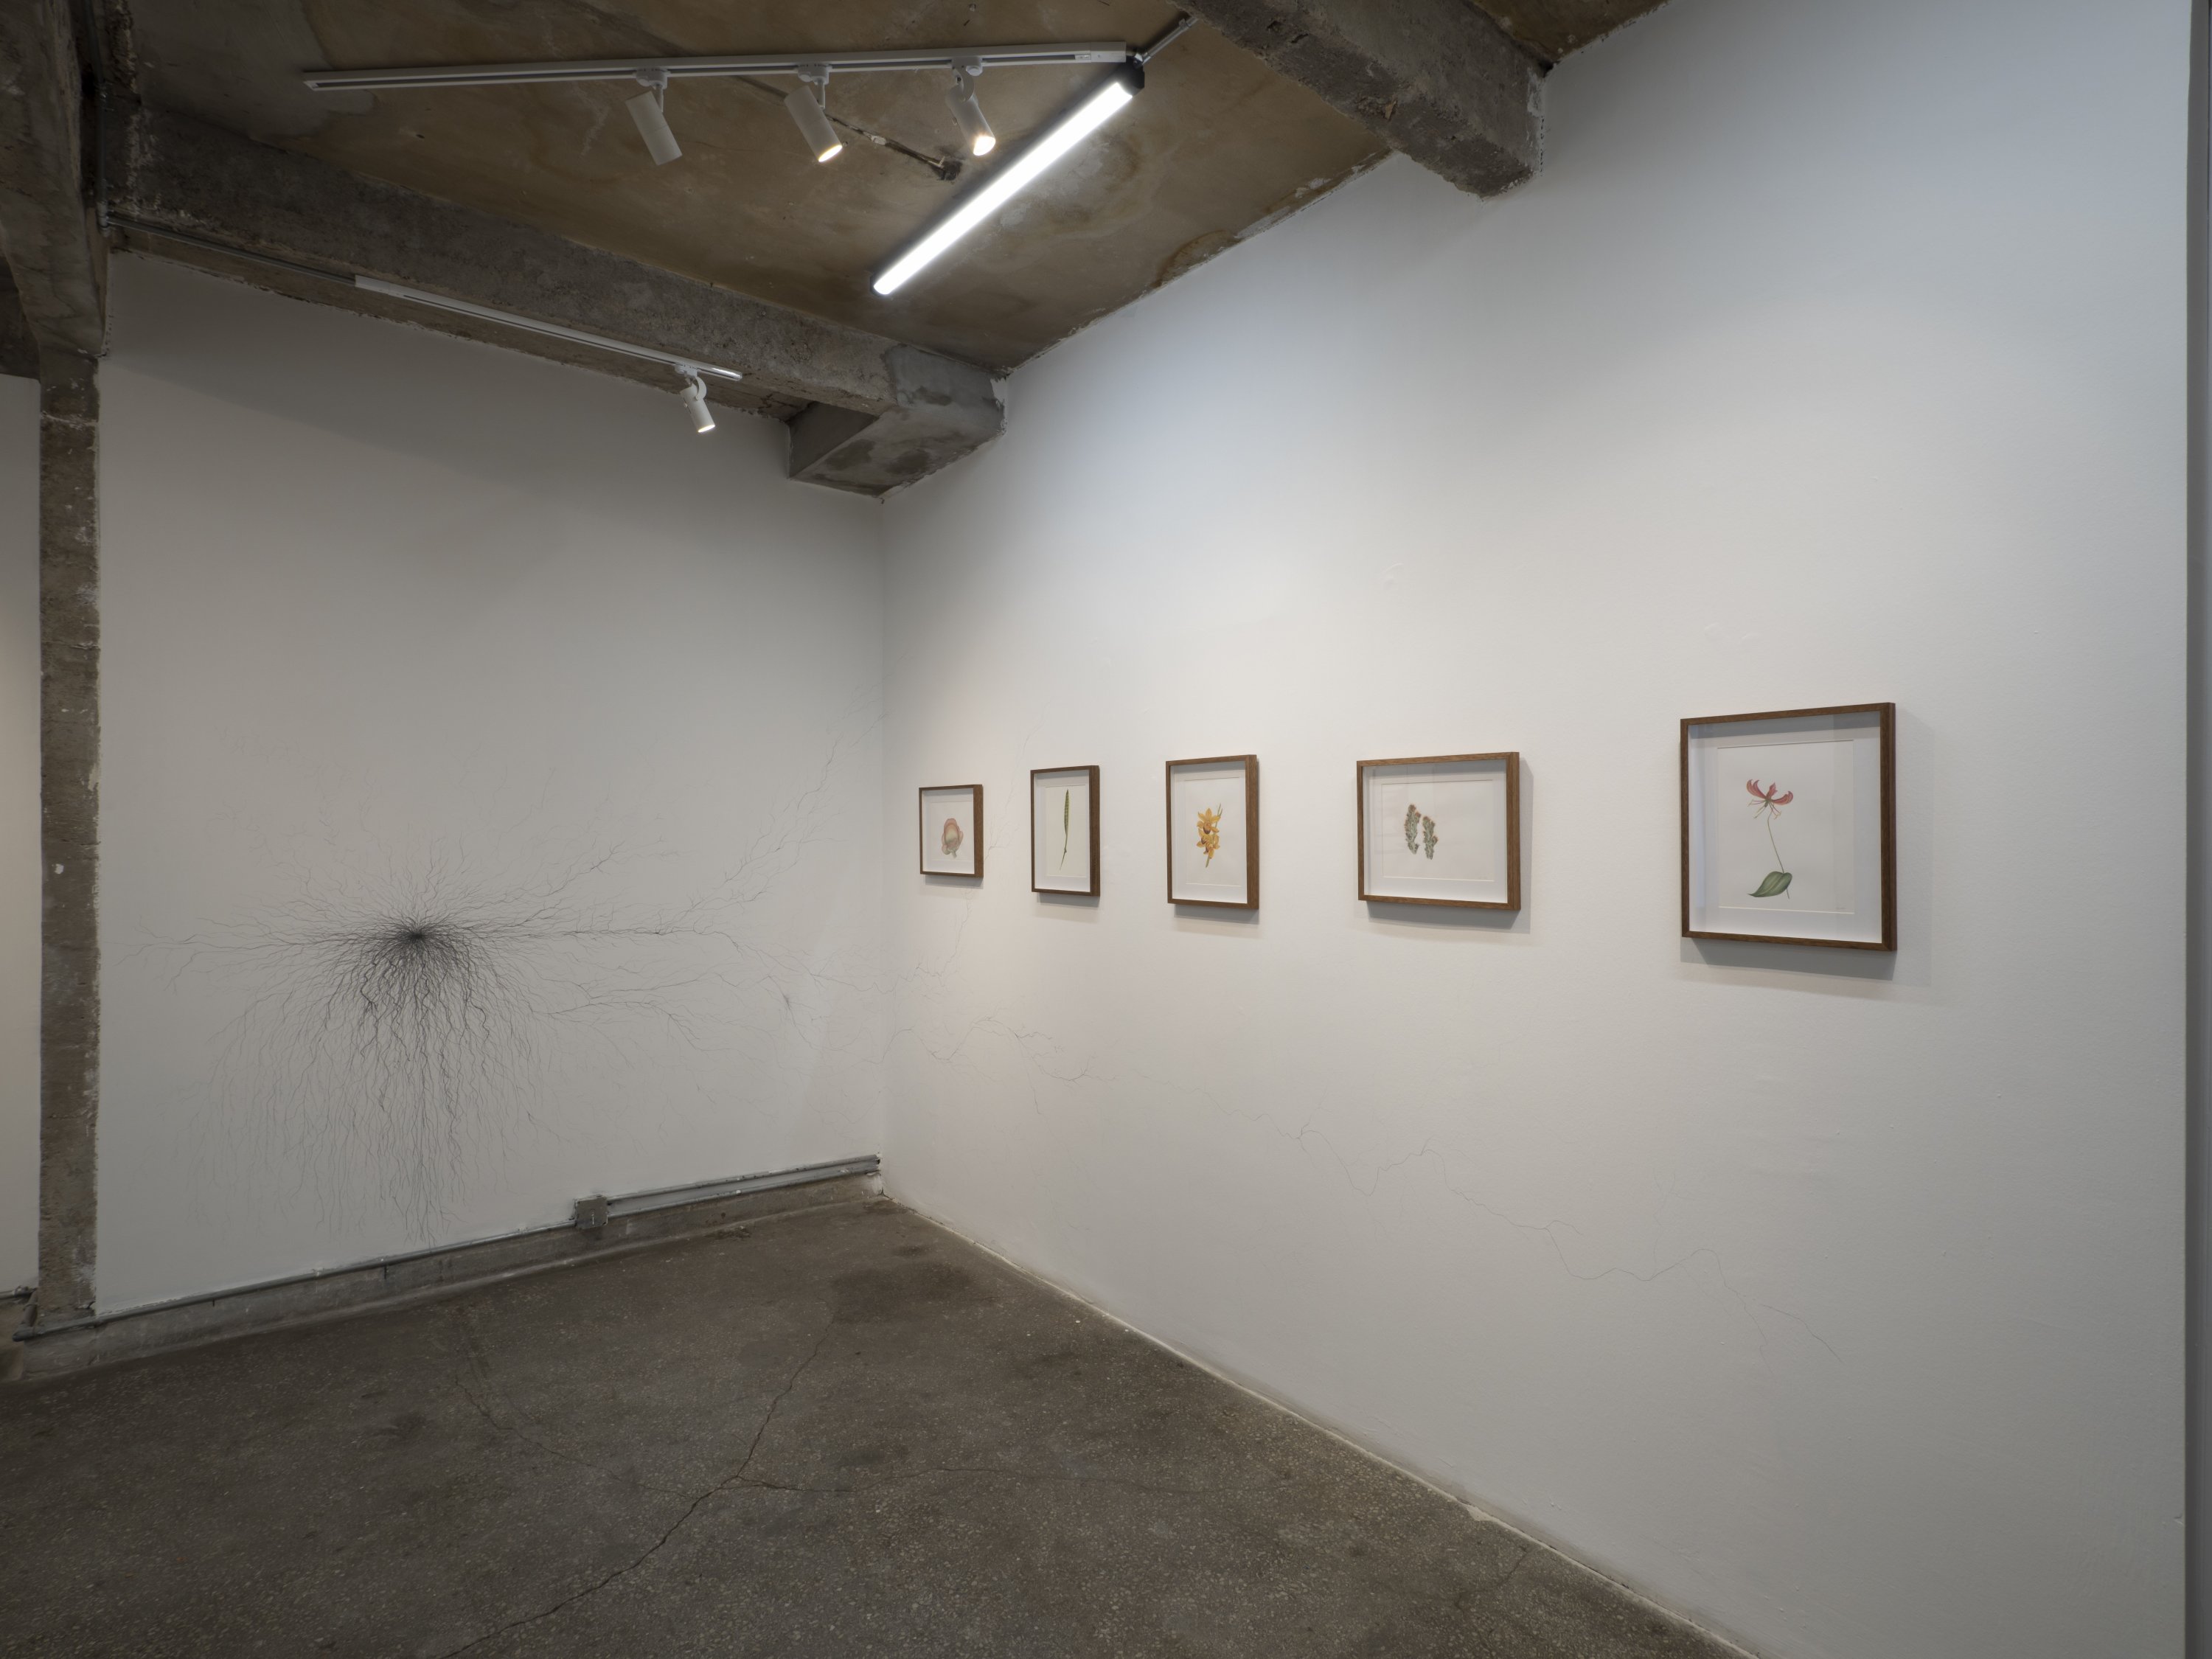 An installation view from 'Trunkless' at Öktem Aykut shows works by Camila Rocha. (Courtesy of Öktem Aykut)